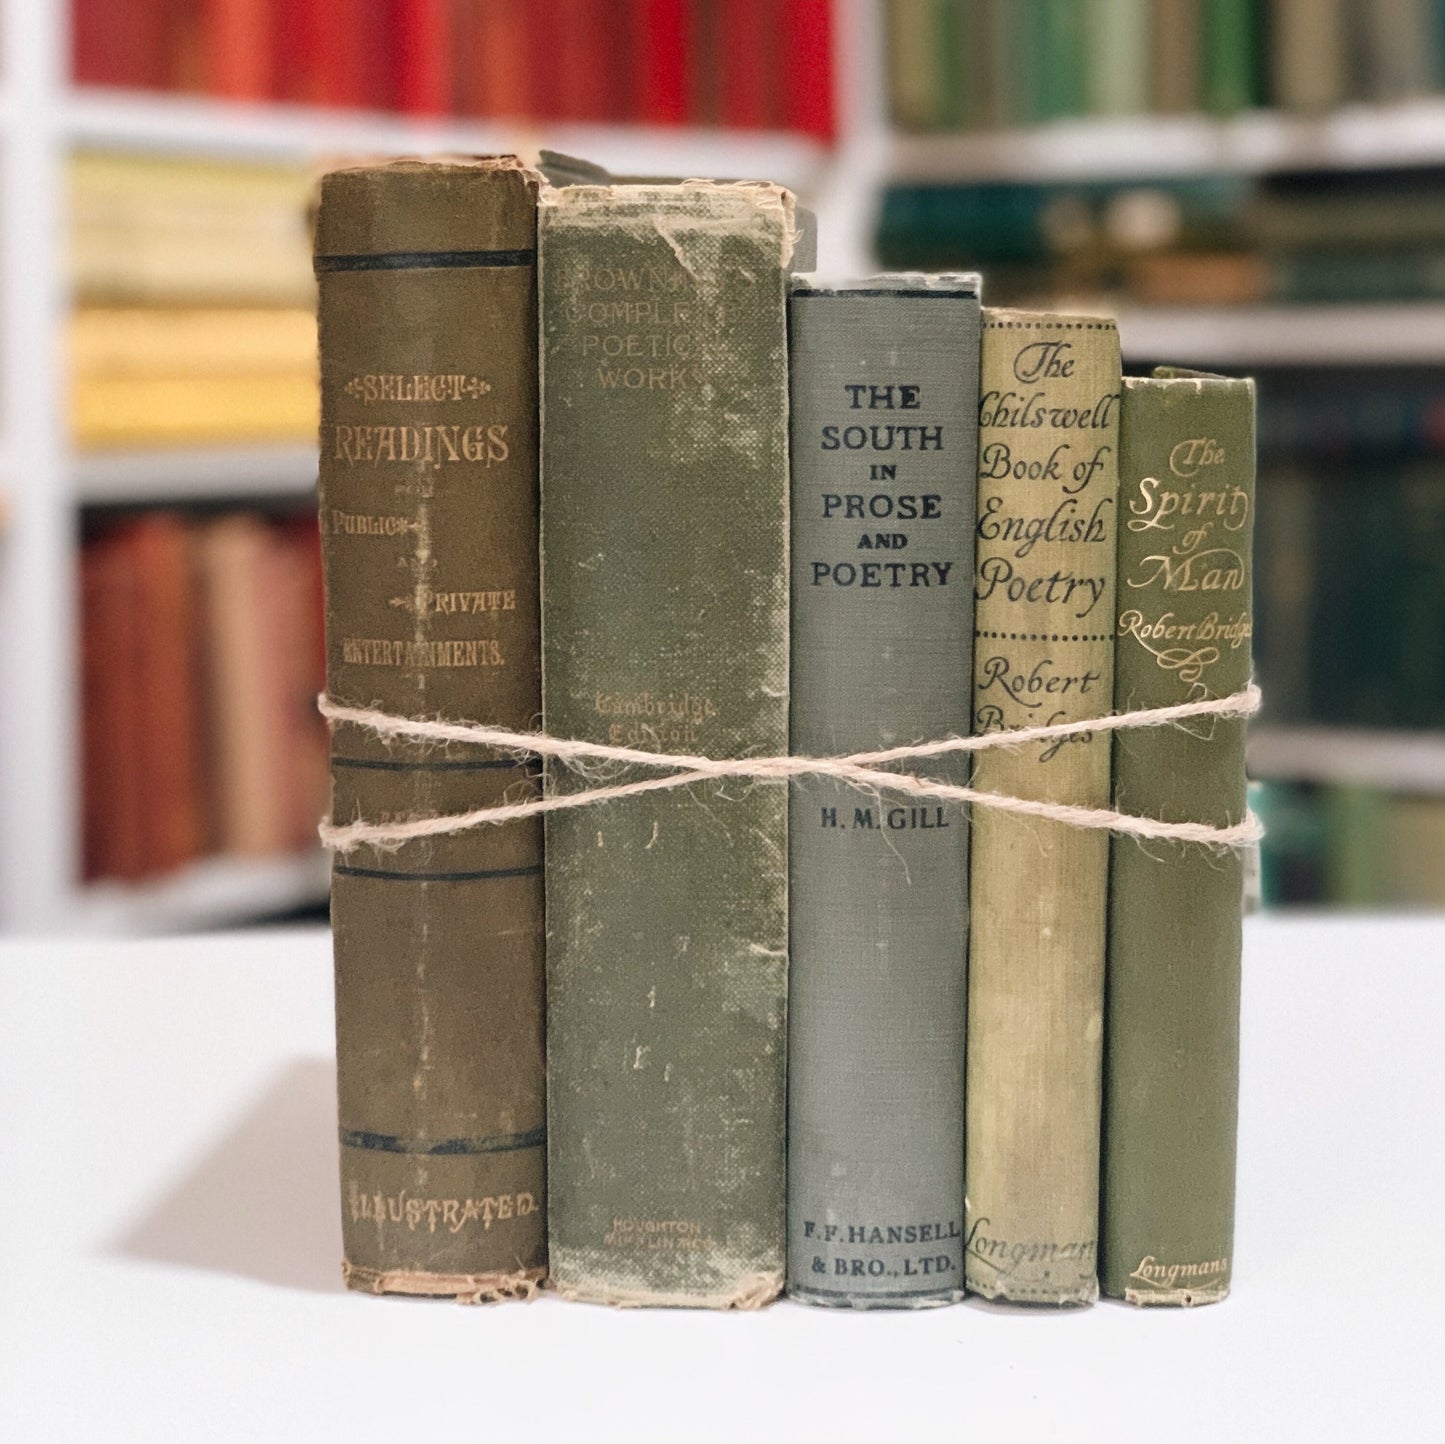 Green Vintage Poetry Book Bundle, Green Books for Shelf Styling